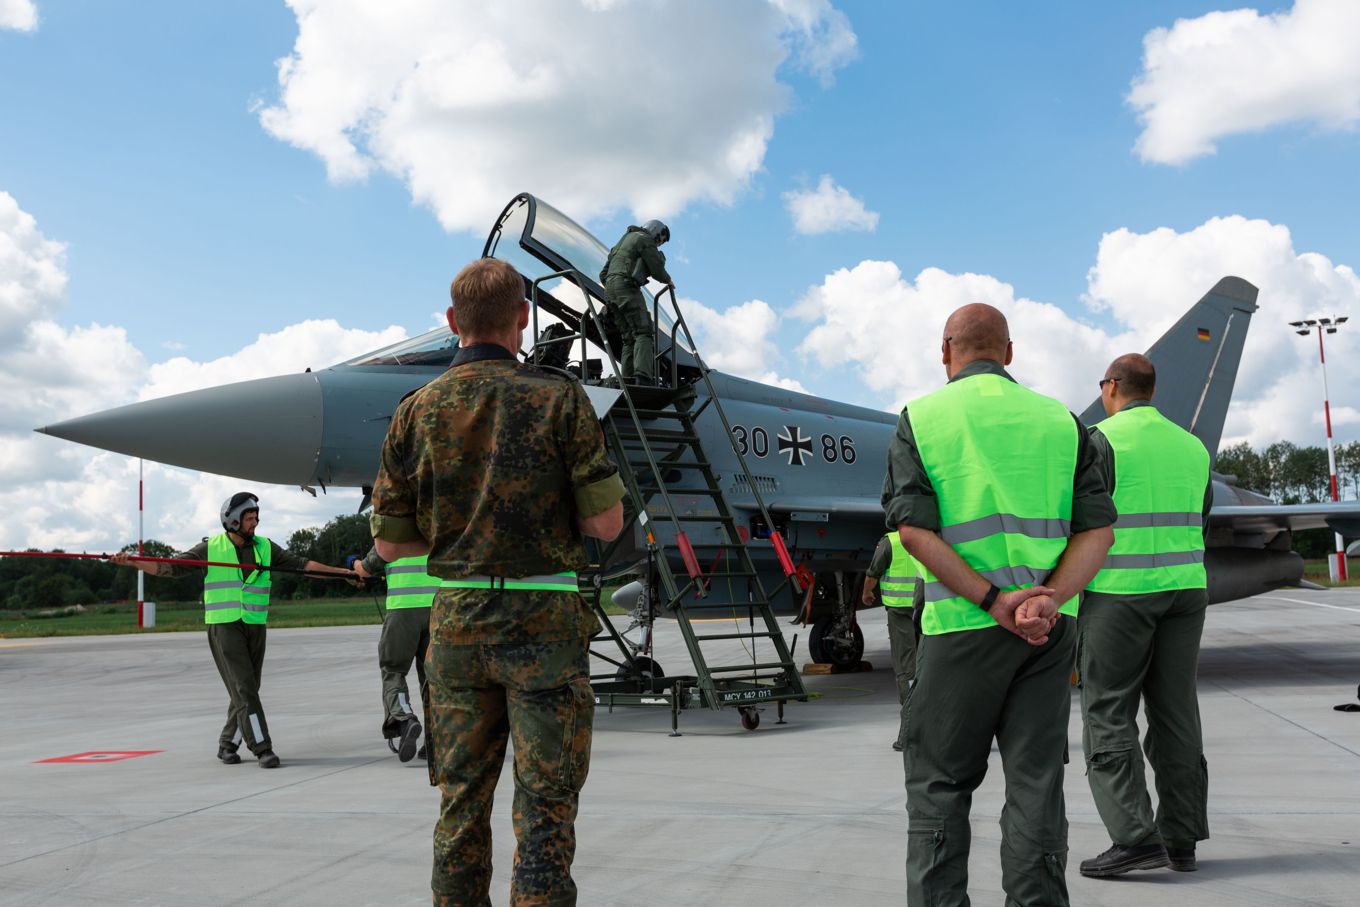 Image shows personnel at the arrival of German Air Force Eurofighters.